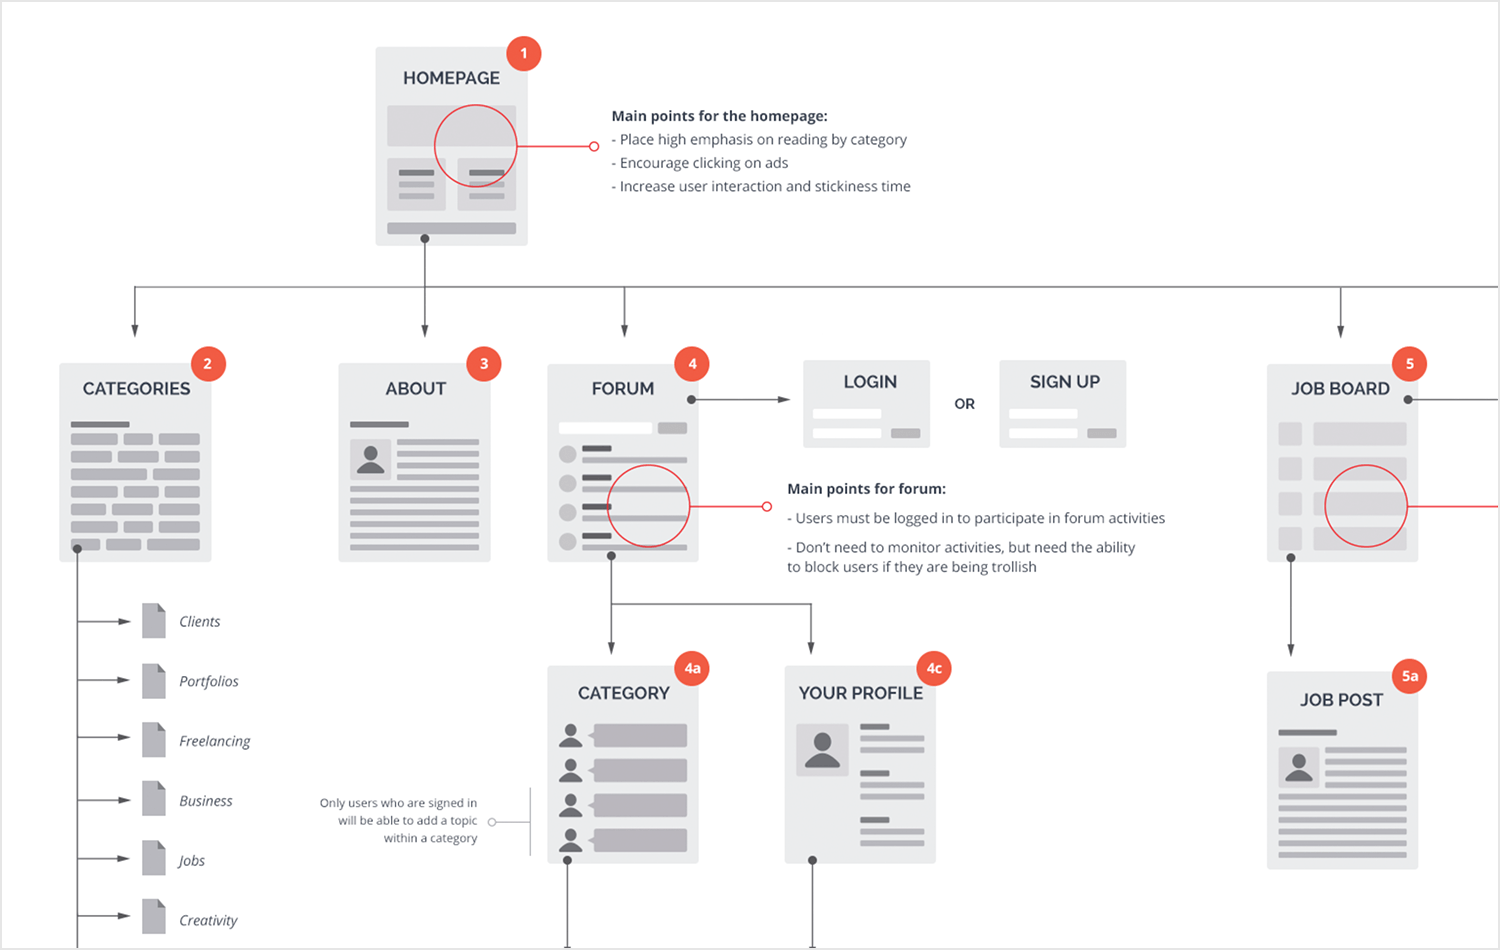 User flow diagram showing steps from homepage to job board on a student guide website.